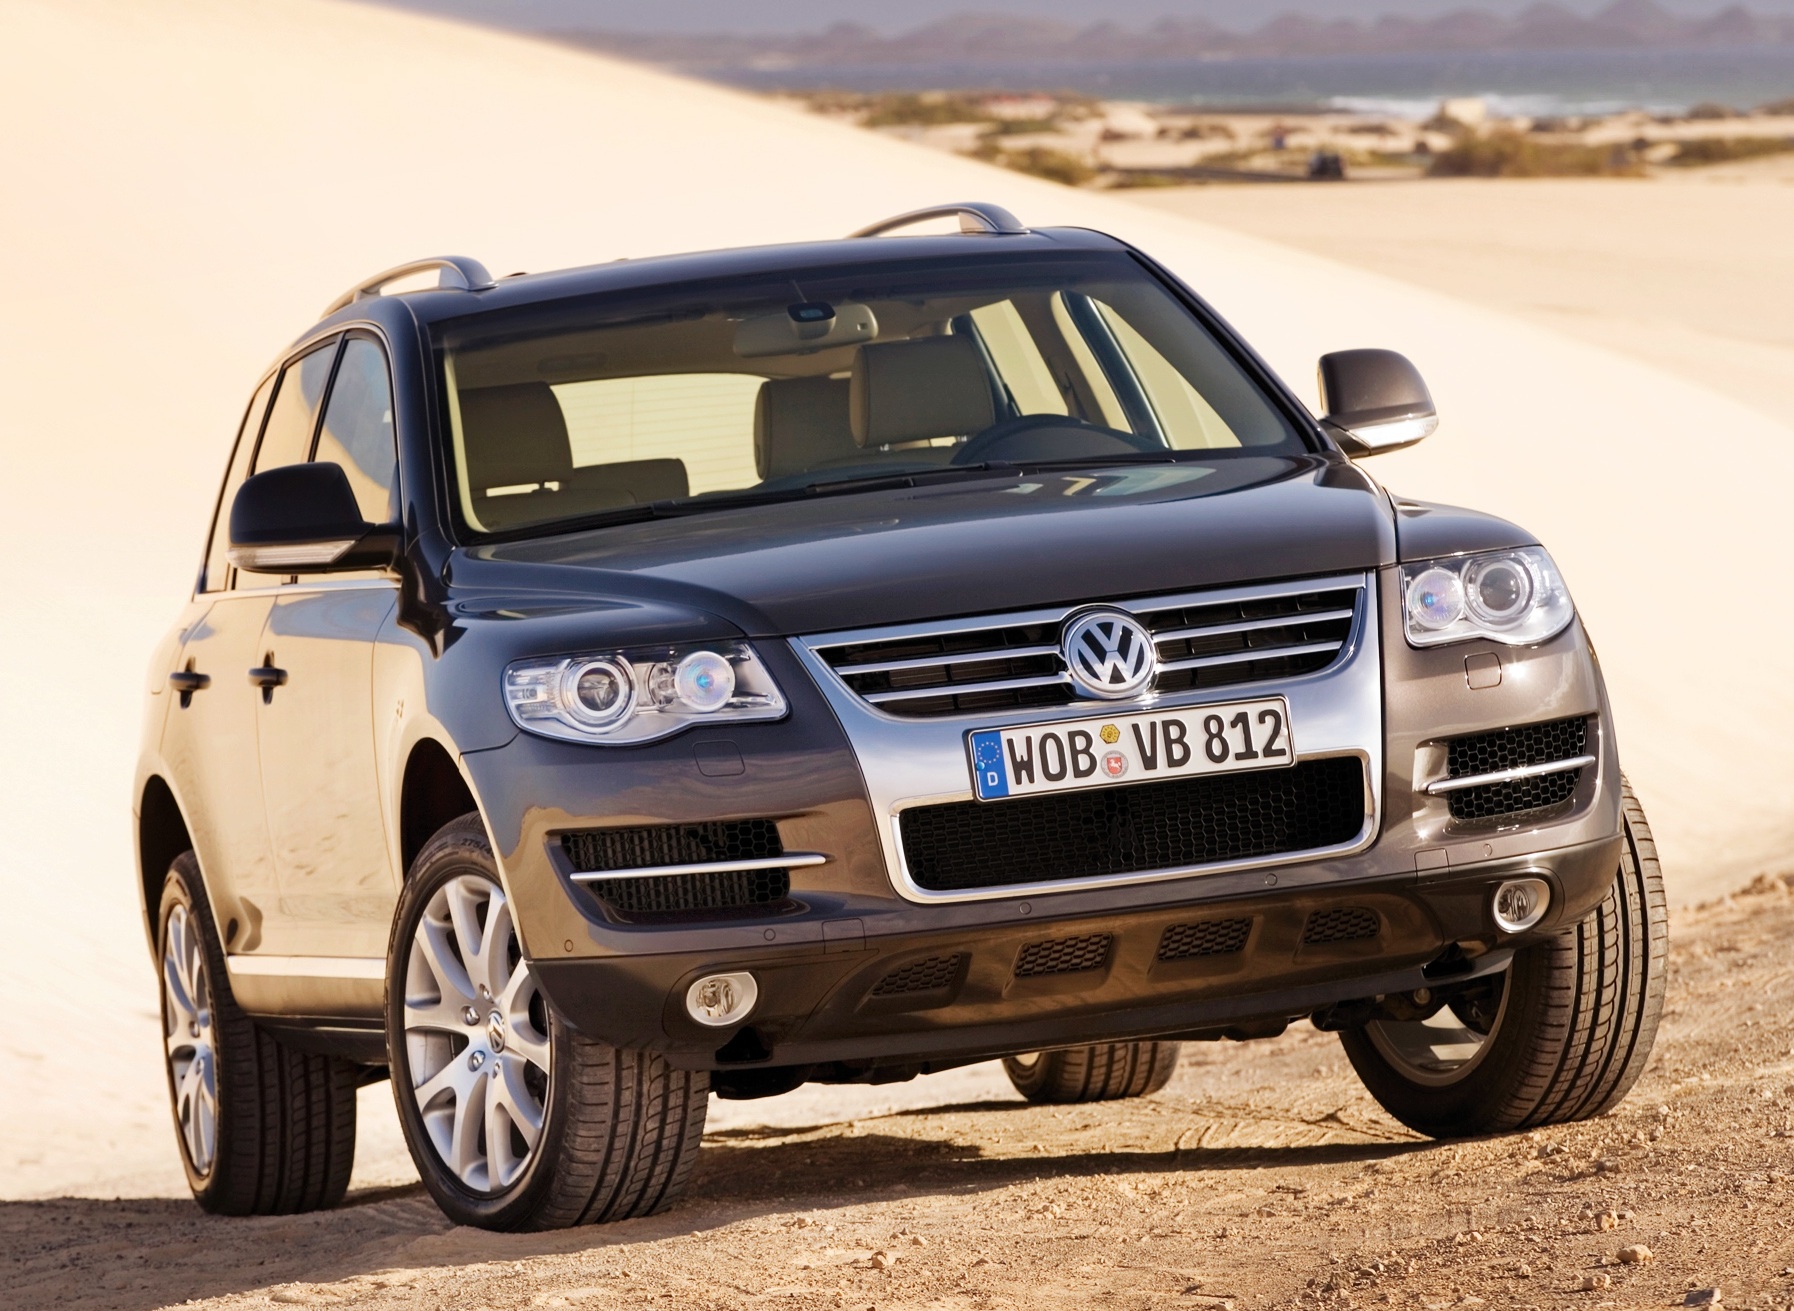 Volkswagen Touareg Car Price India, Specifications